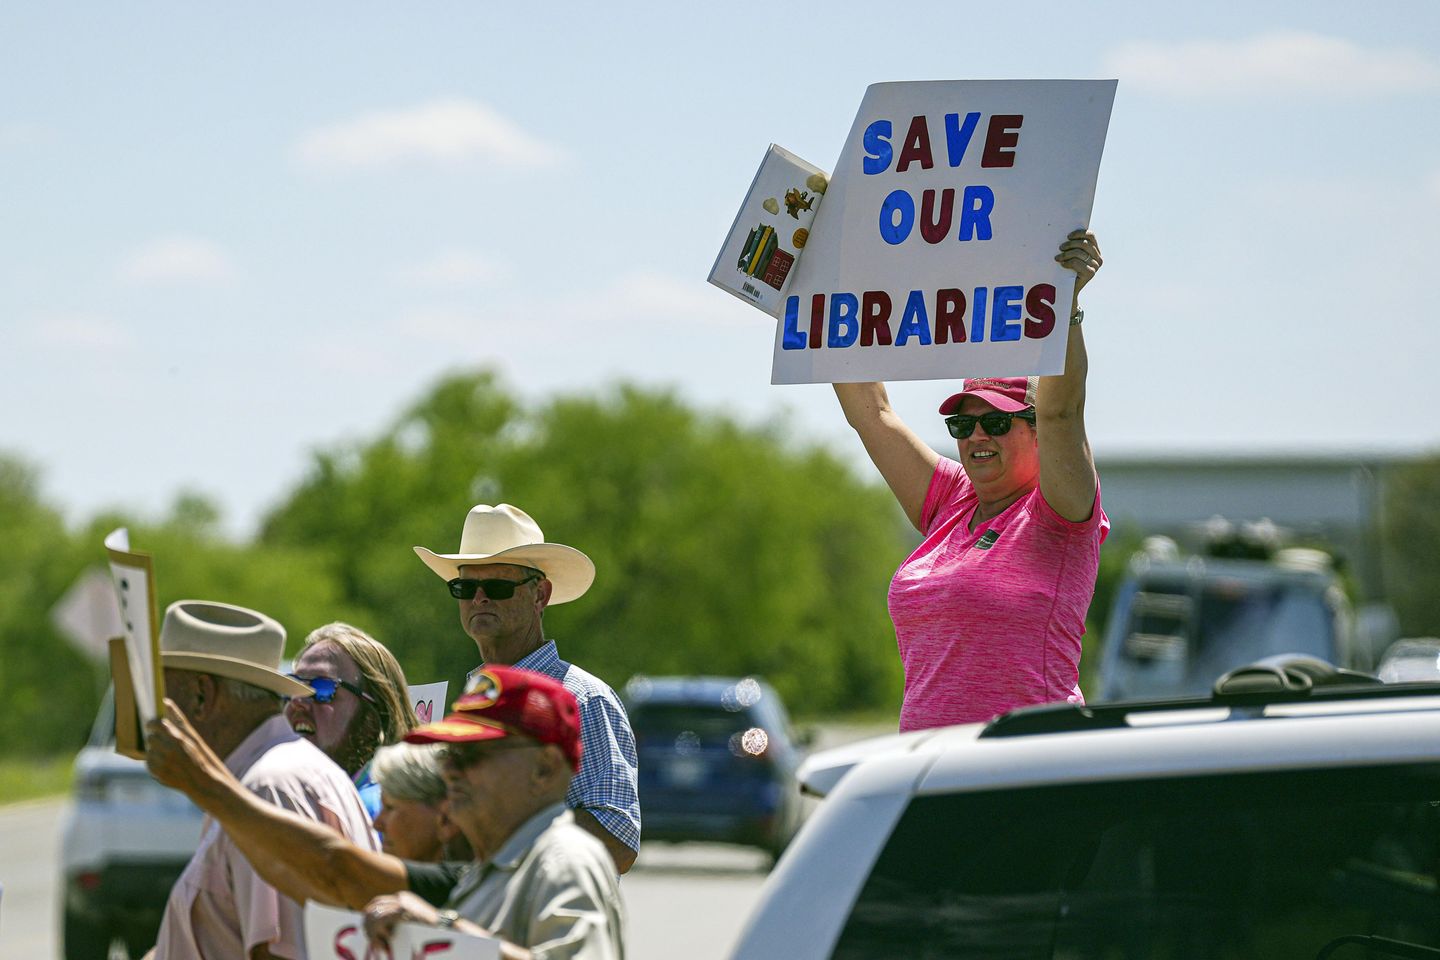 Texas county roiled by book ban considered closing libraries